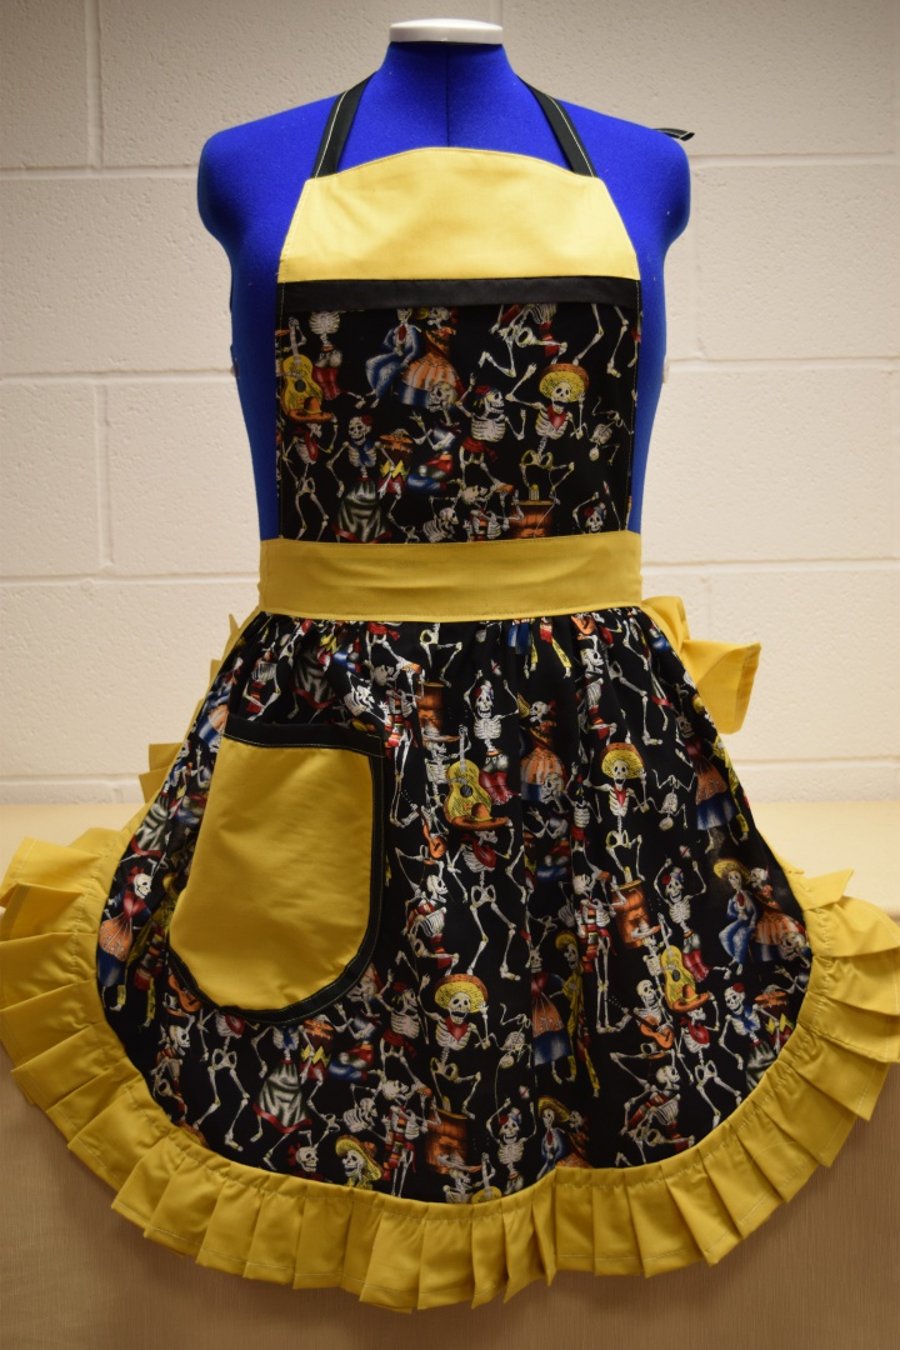 Vintage 50s Style Full Apron Pinny - Black "Day of the Dead" with Gold Trim